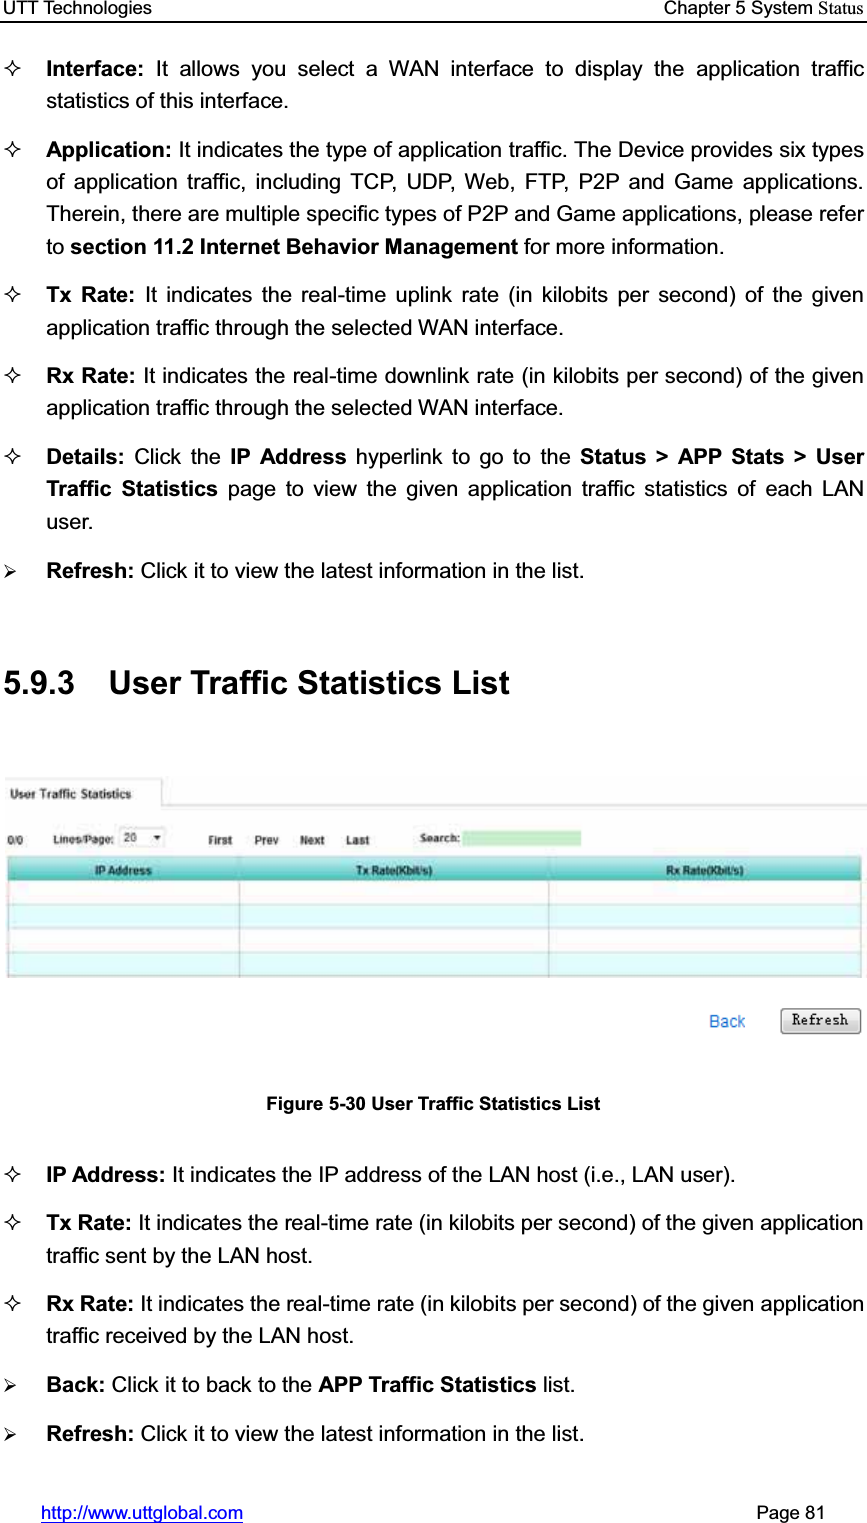 UTT Technologies    Chapter 5 System Statushttp://www.uttglobal.com                                                       Page 81 Interface: It allows you select a WAN interface to display the application traffic statistics of this interface.Application: It indicates the type of application traffic. The Device provides six types of application traffic, including TCP, UDP, Web, FTP, P2P and Game applications. Therein, there are multiple specific types of P2P and Game applications, please refer to section 11.2 Internet Behavior Management for more information.Tx Rate: It indicates the real-time uplink rate (in kilobits per second) of the given application traffic through the selected WAN interface.Rx Rate: It indicates the real-time downlink rate (in kilobits per second) of the given application traffic through the selected WAN interface.Details:  Click the IP Address hyperlink to go to the Status &gt; APP Stats &gt; User Traffic Statistics page to view the given application traffic statistics of each LAN user.¾Refresh: Click it to view the latest information in the list.5.9.3  User Traffic Statistics List Figure 5-30 User Traffic Statistics List IP Address: It indicates the IP address of the LAN host (i.e., LAN user). Tx Rate: It indicates the real-time rate (in kilobits per second) of the given application traffic sent by the LAN host.Rx Rate: It indicates the real-time rate (in kilobits per second) of the given application traffic received by the LAN host.¾Back: Click it to back to the APP Traffic Statistics list.¾Refresh: Click it to view the latest information in the list.